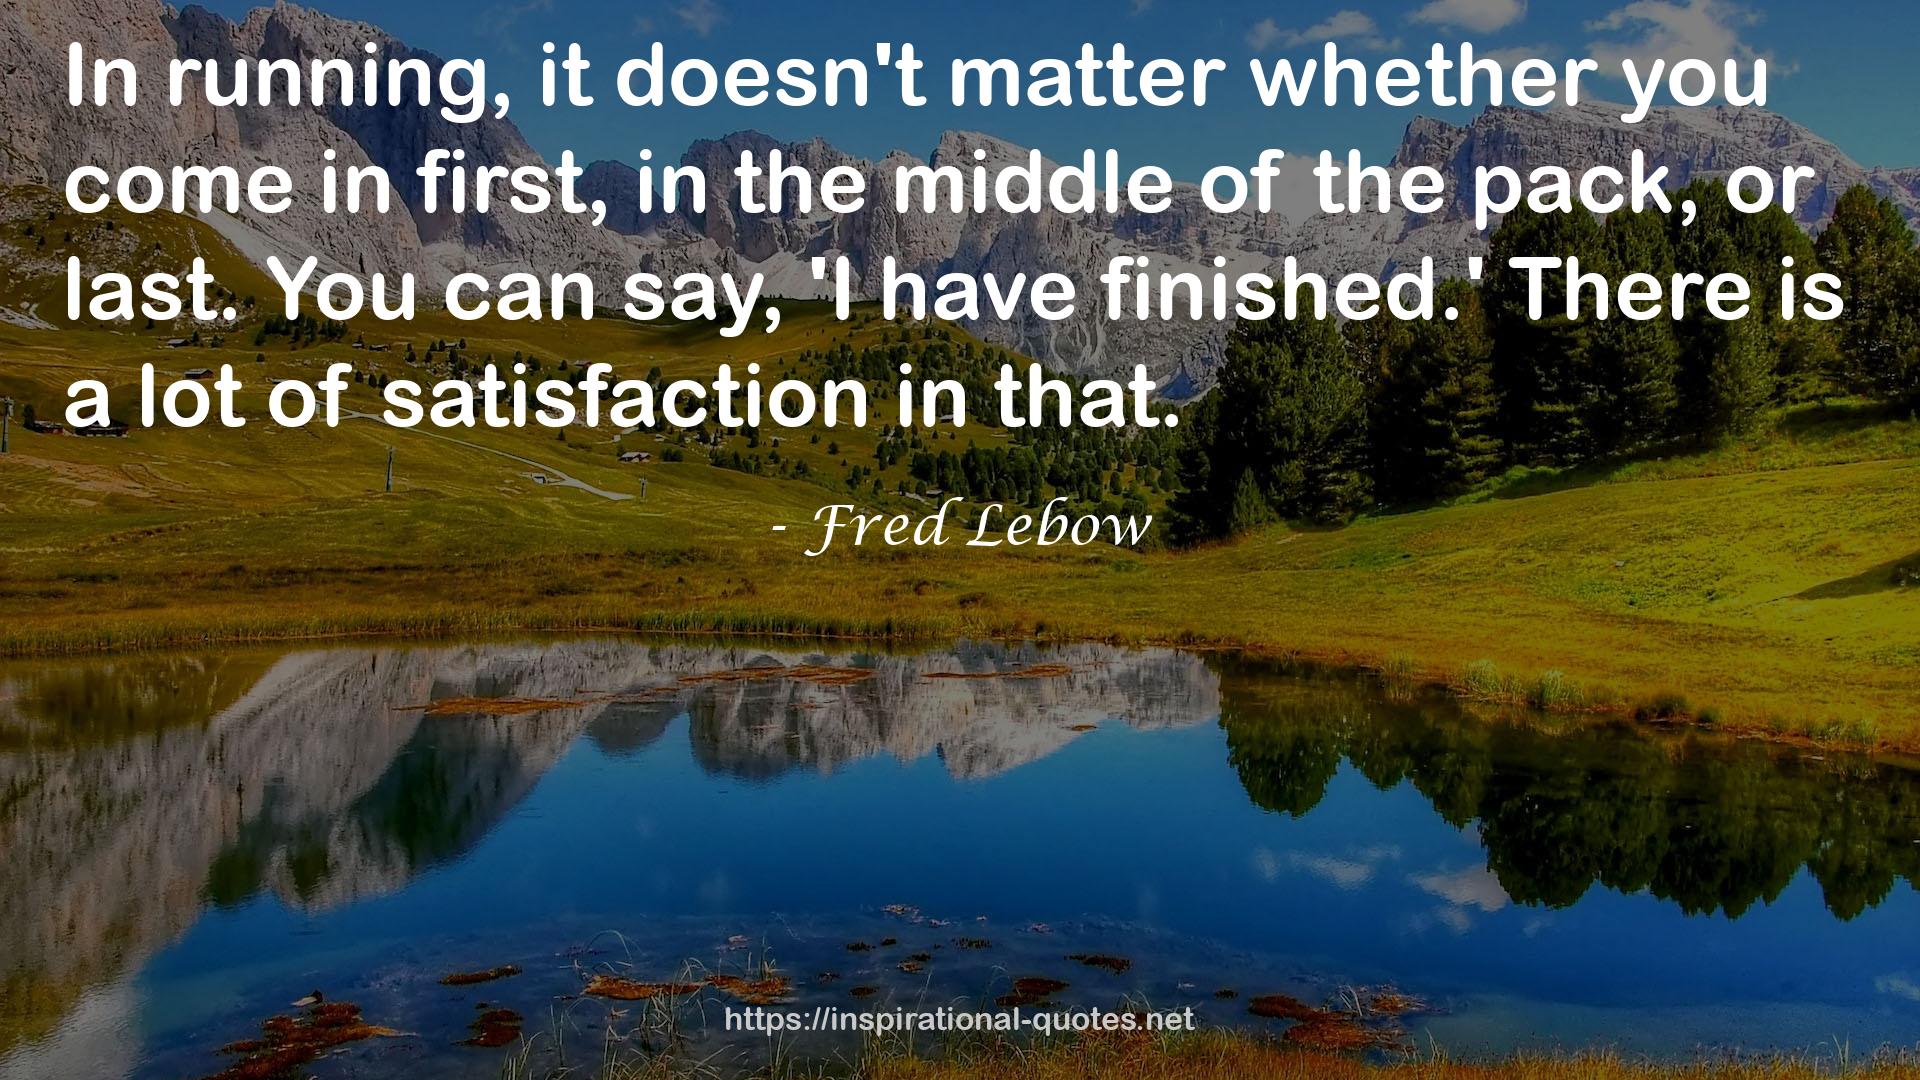 Fred Lebow QUOTES